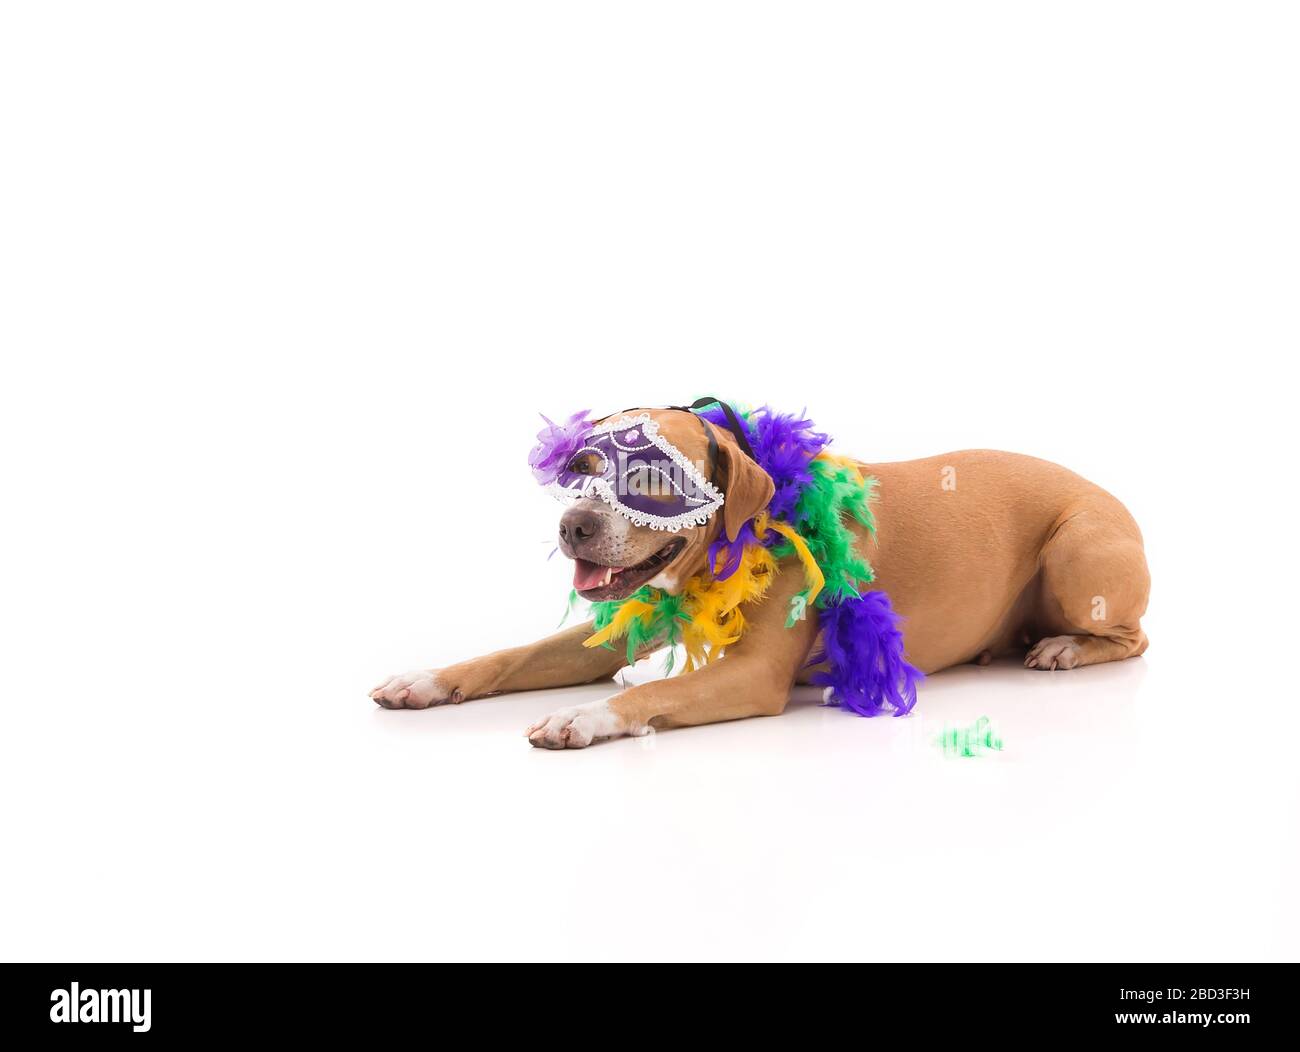 Red pit bull dressed for Mardi Gras laying down on white background Stock Photo